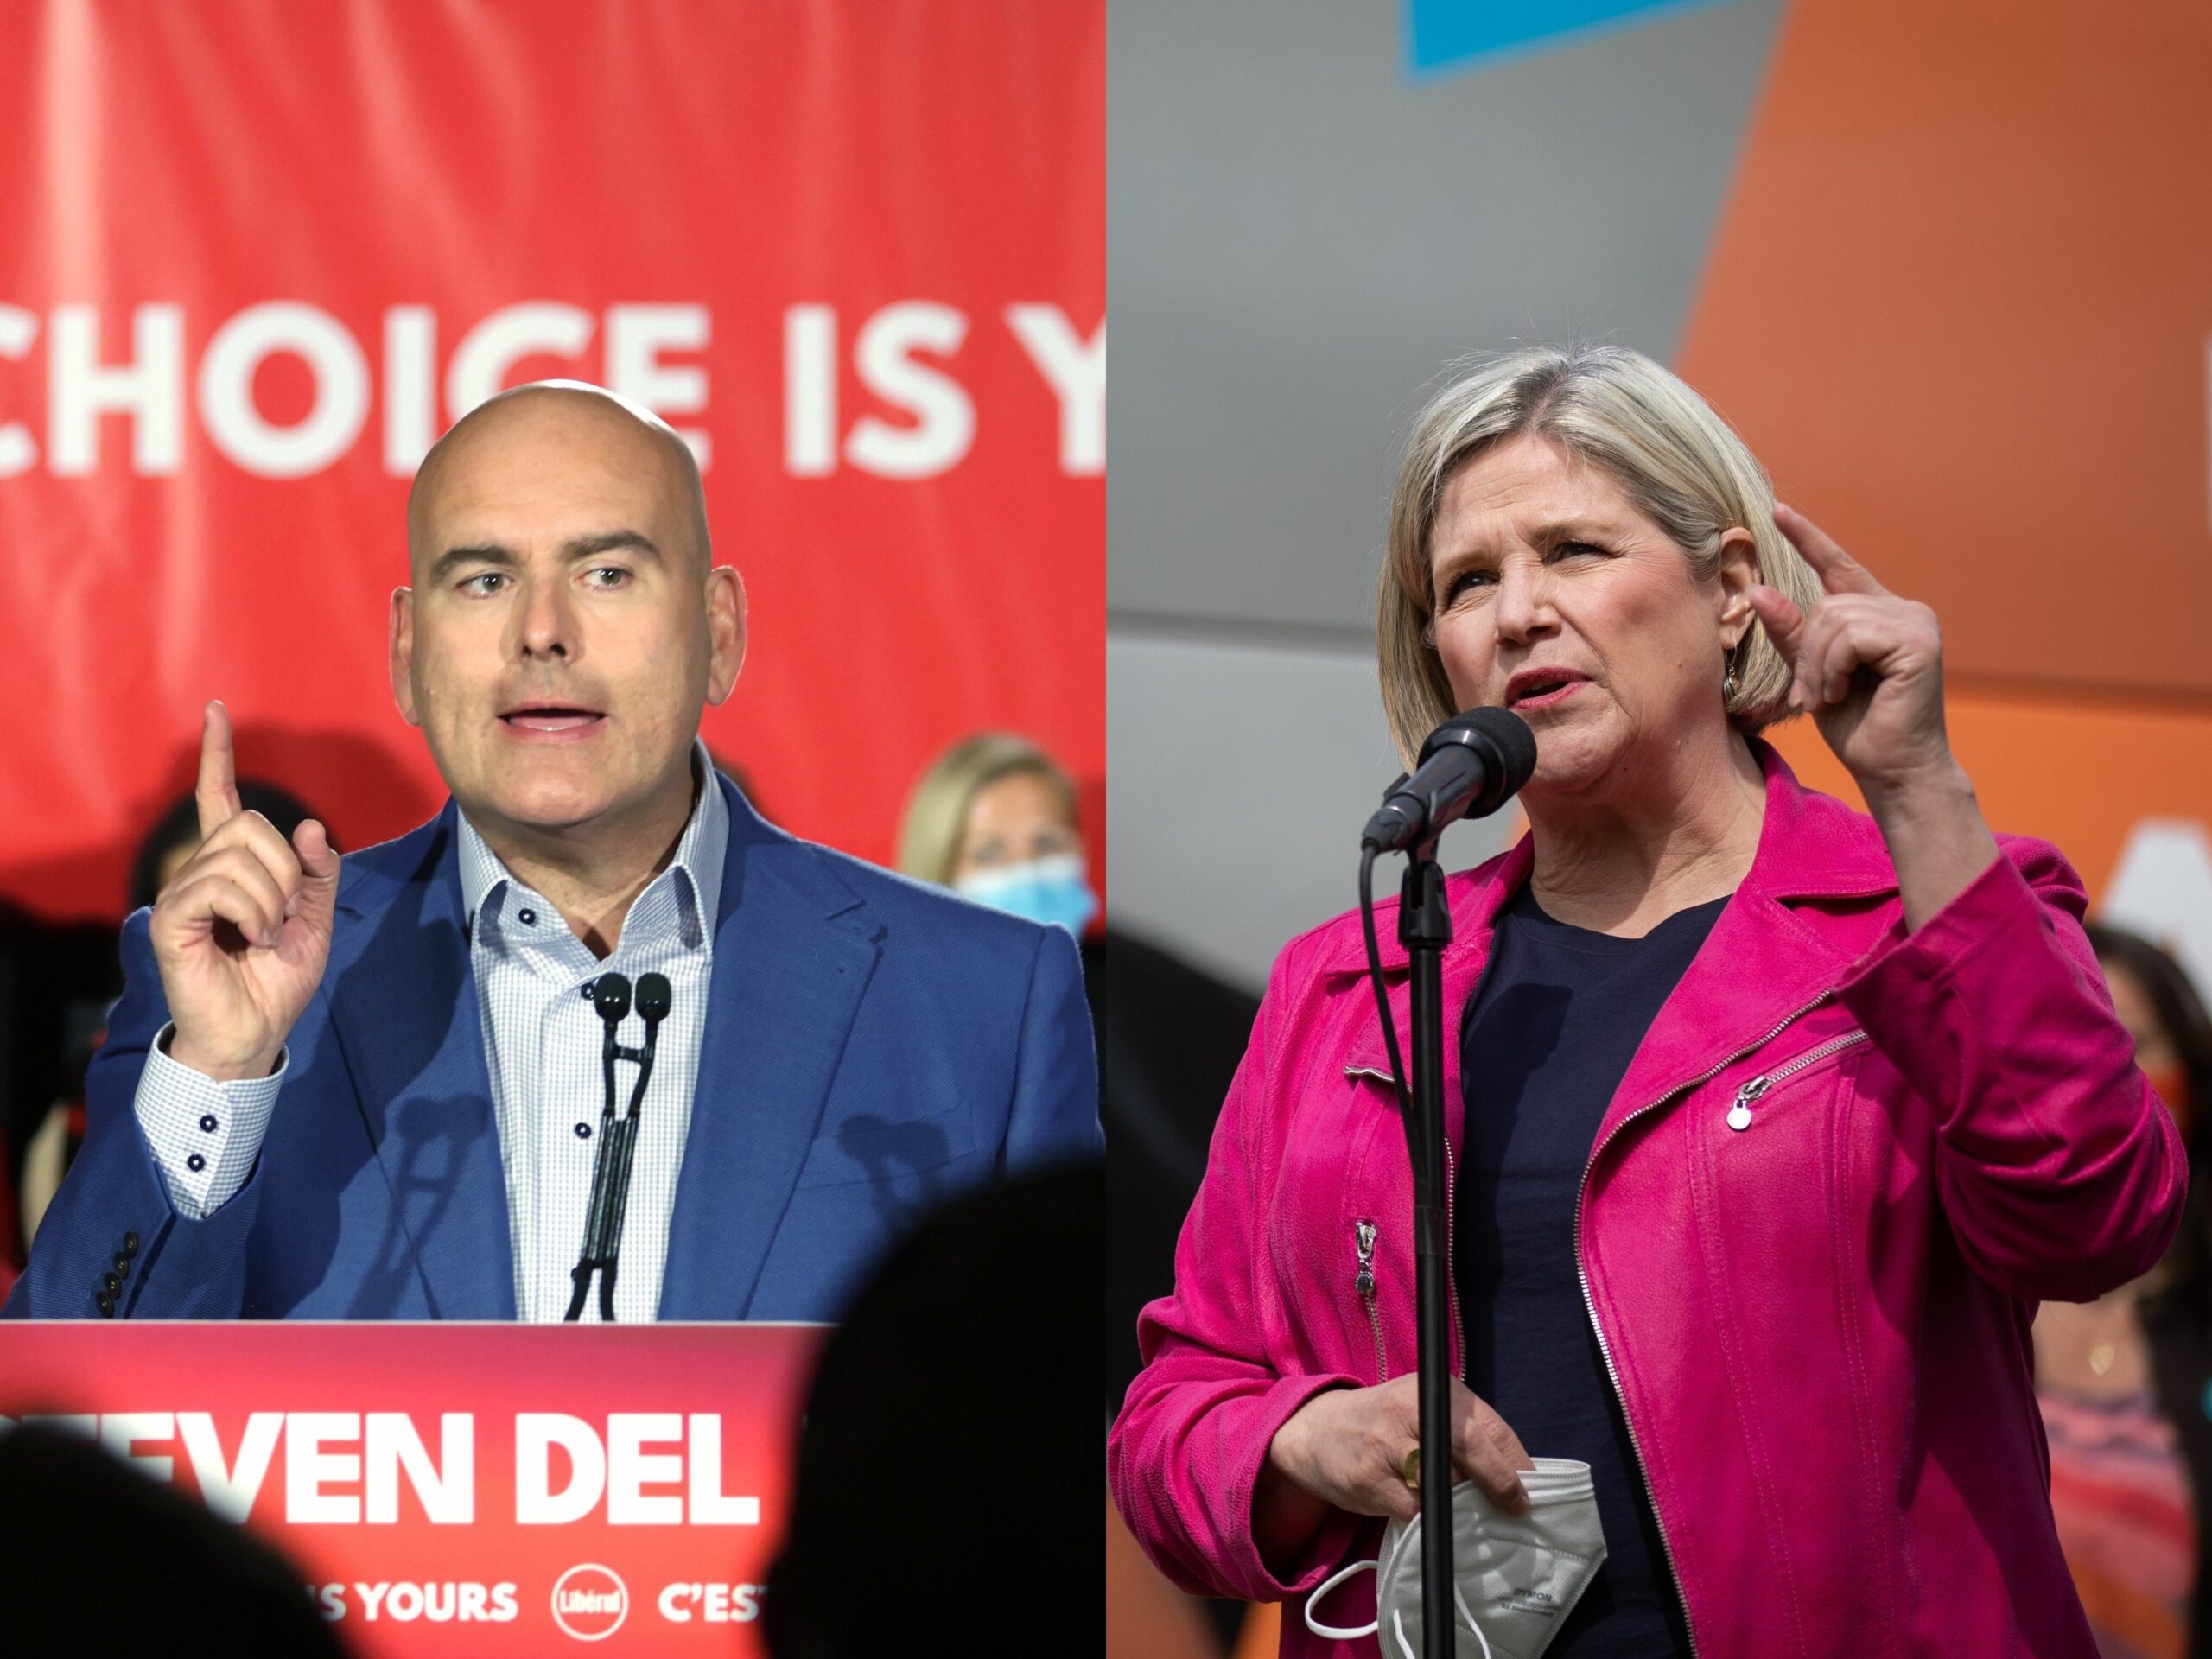 Horwath responds to allegations by Del Duca of gender-focused attacks on candidates